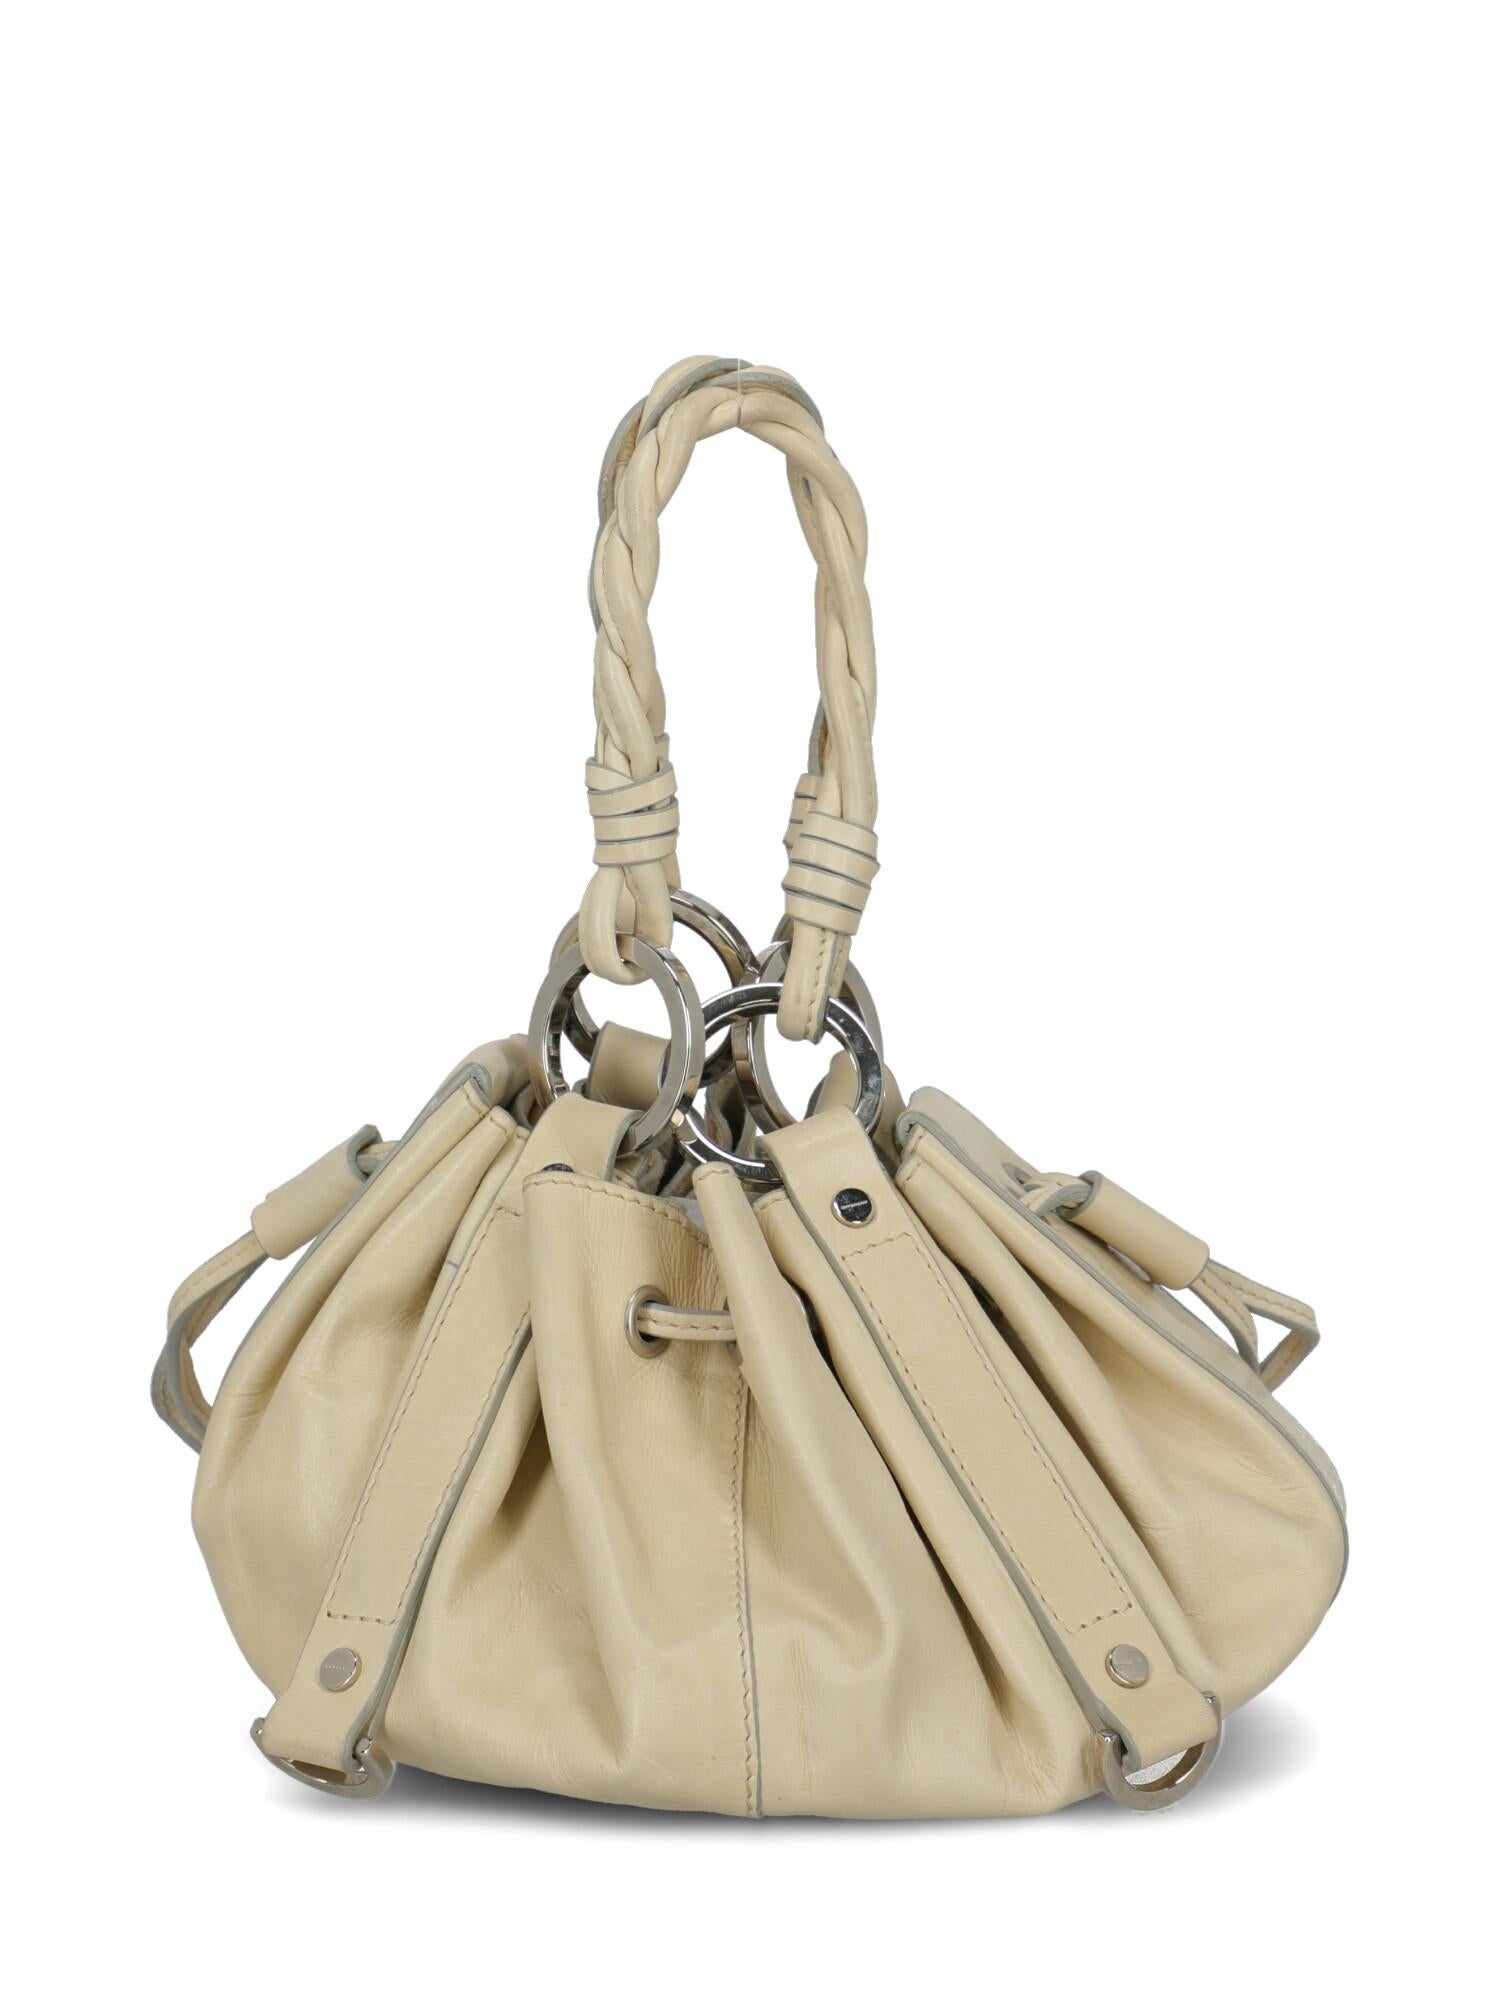 Givenchy Woman Handbag Ecru Leather In Fair Condition For Sale In Milan, IT